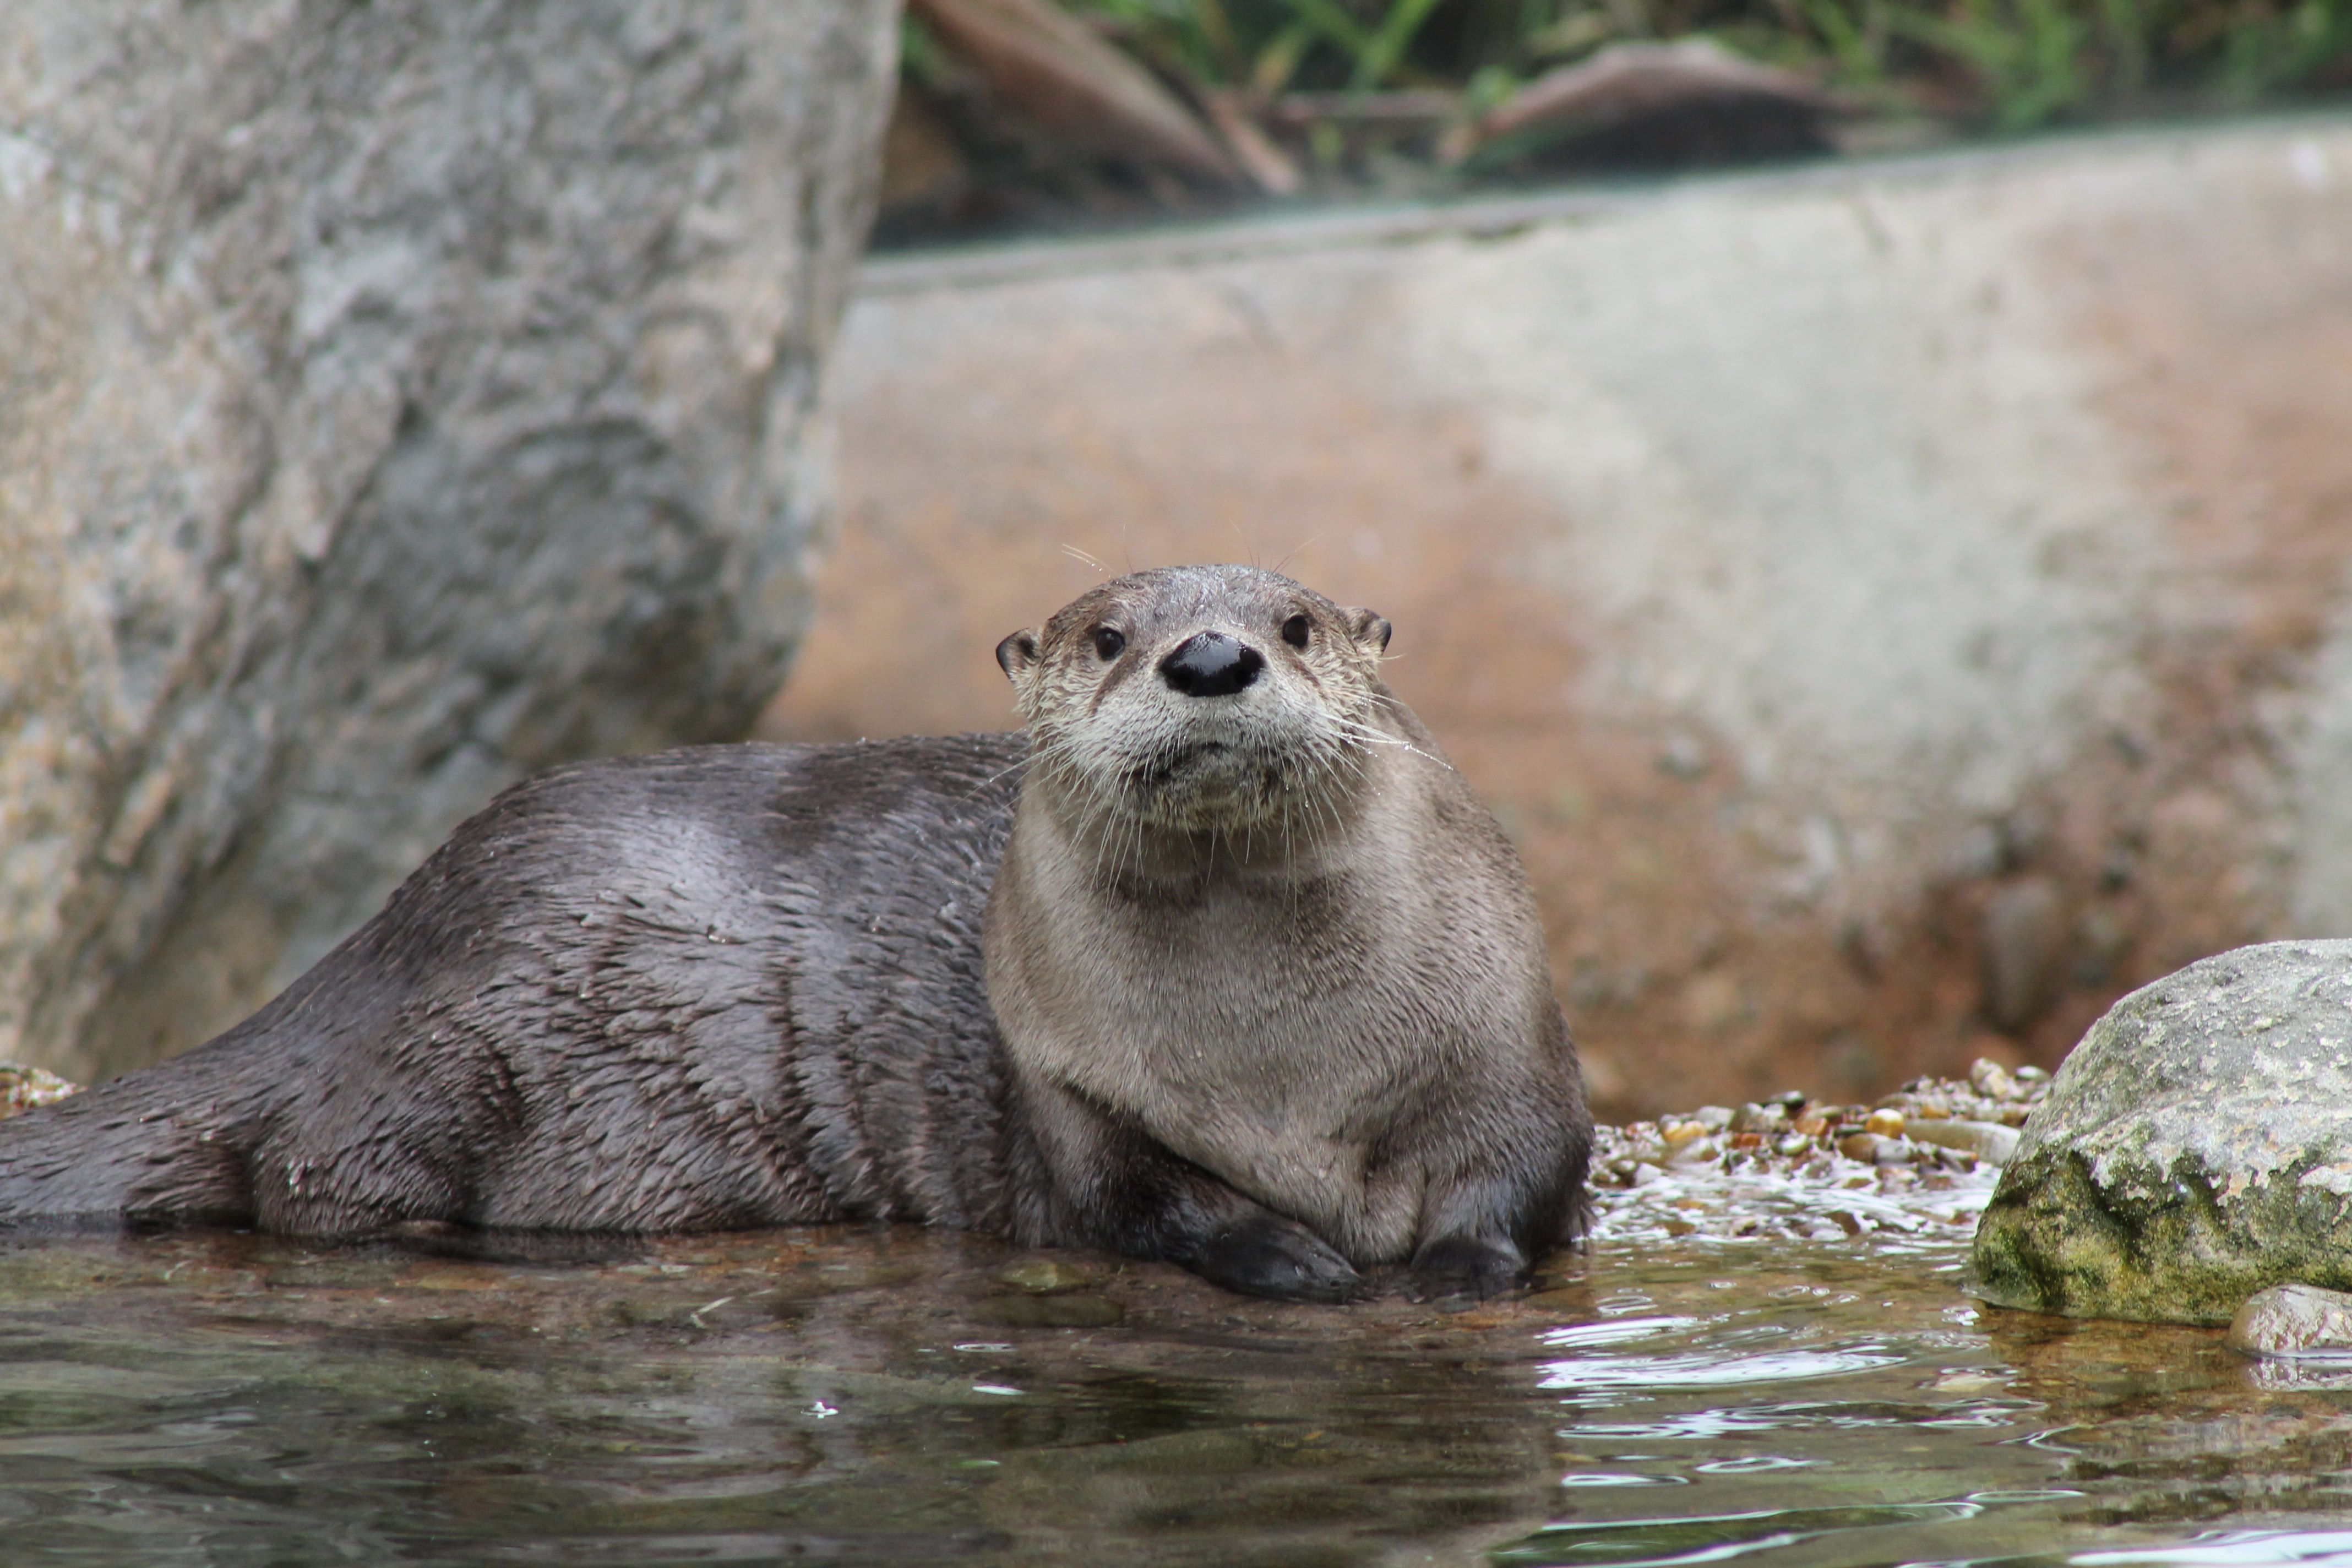 Otters Don’t Belong In Cafes